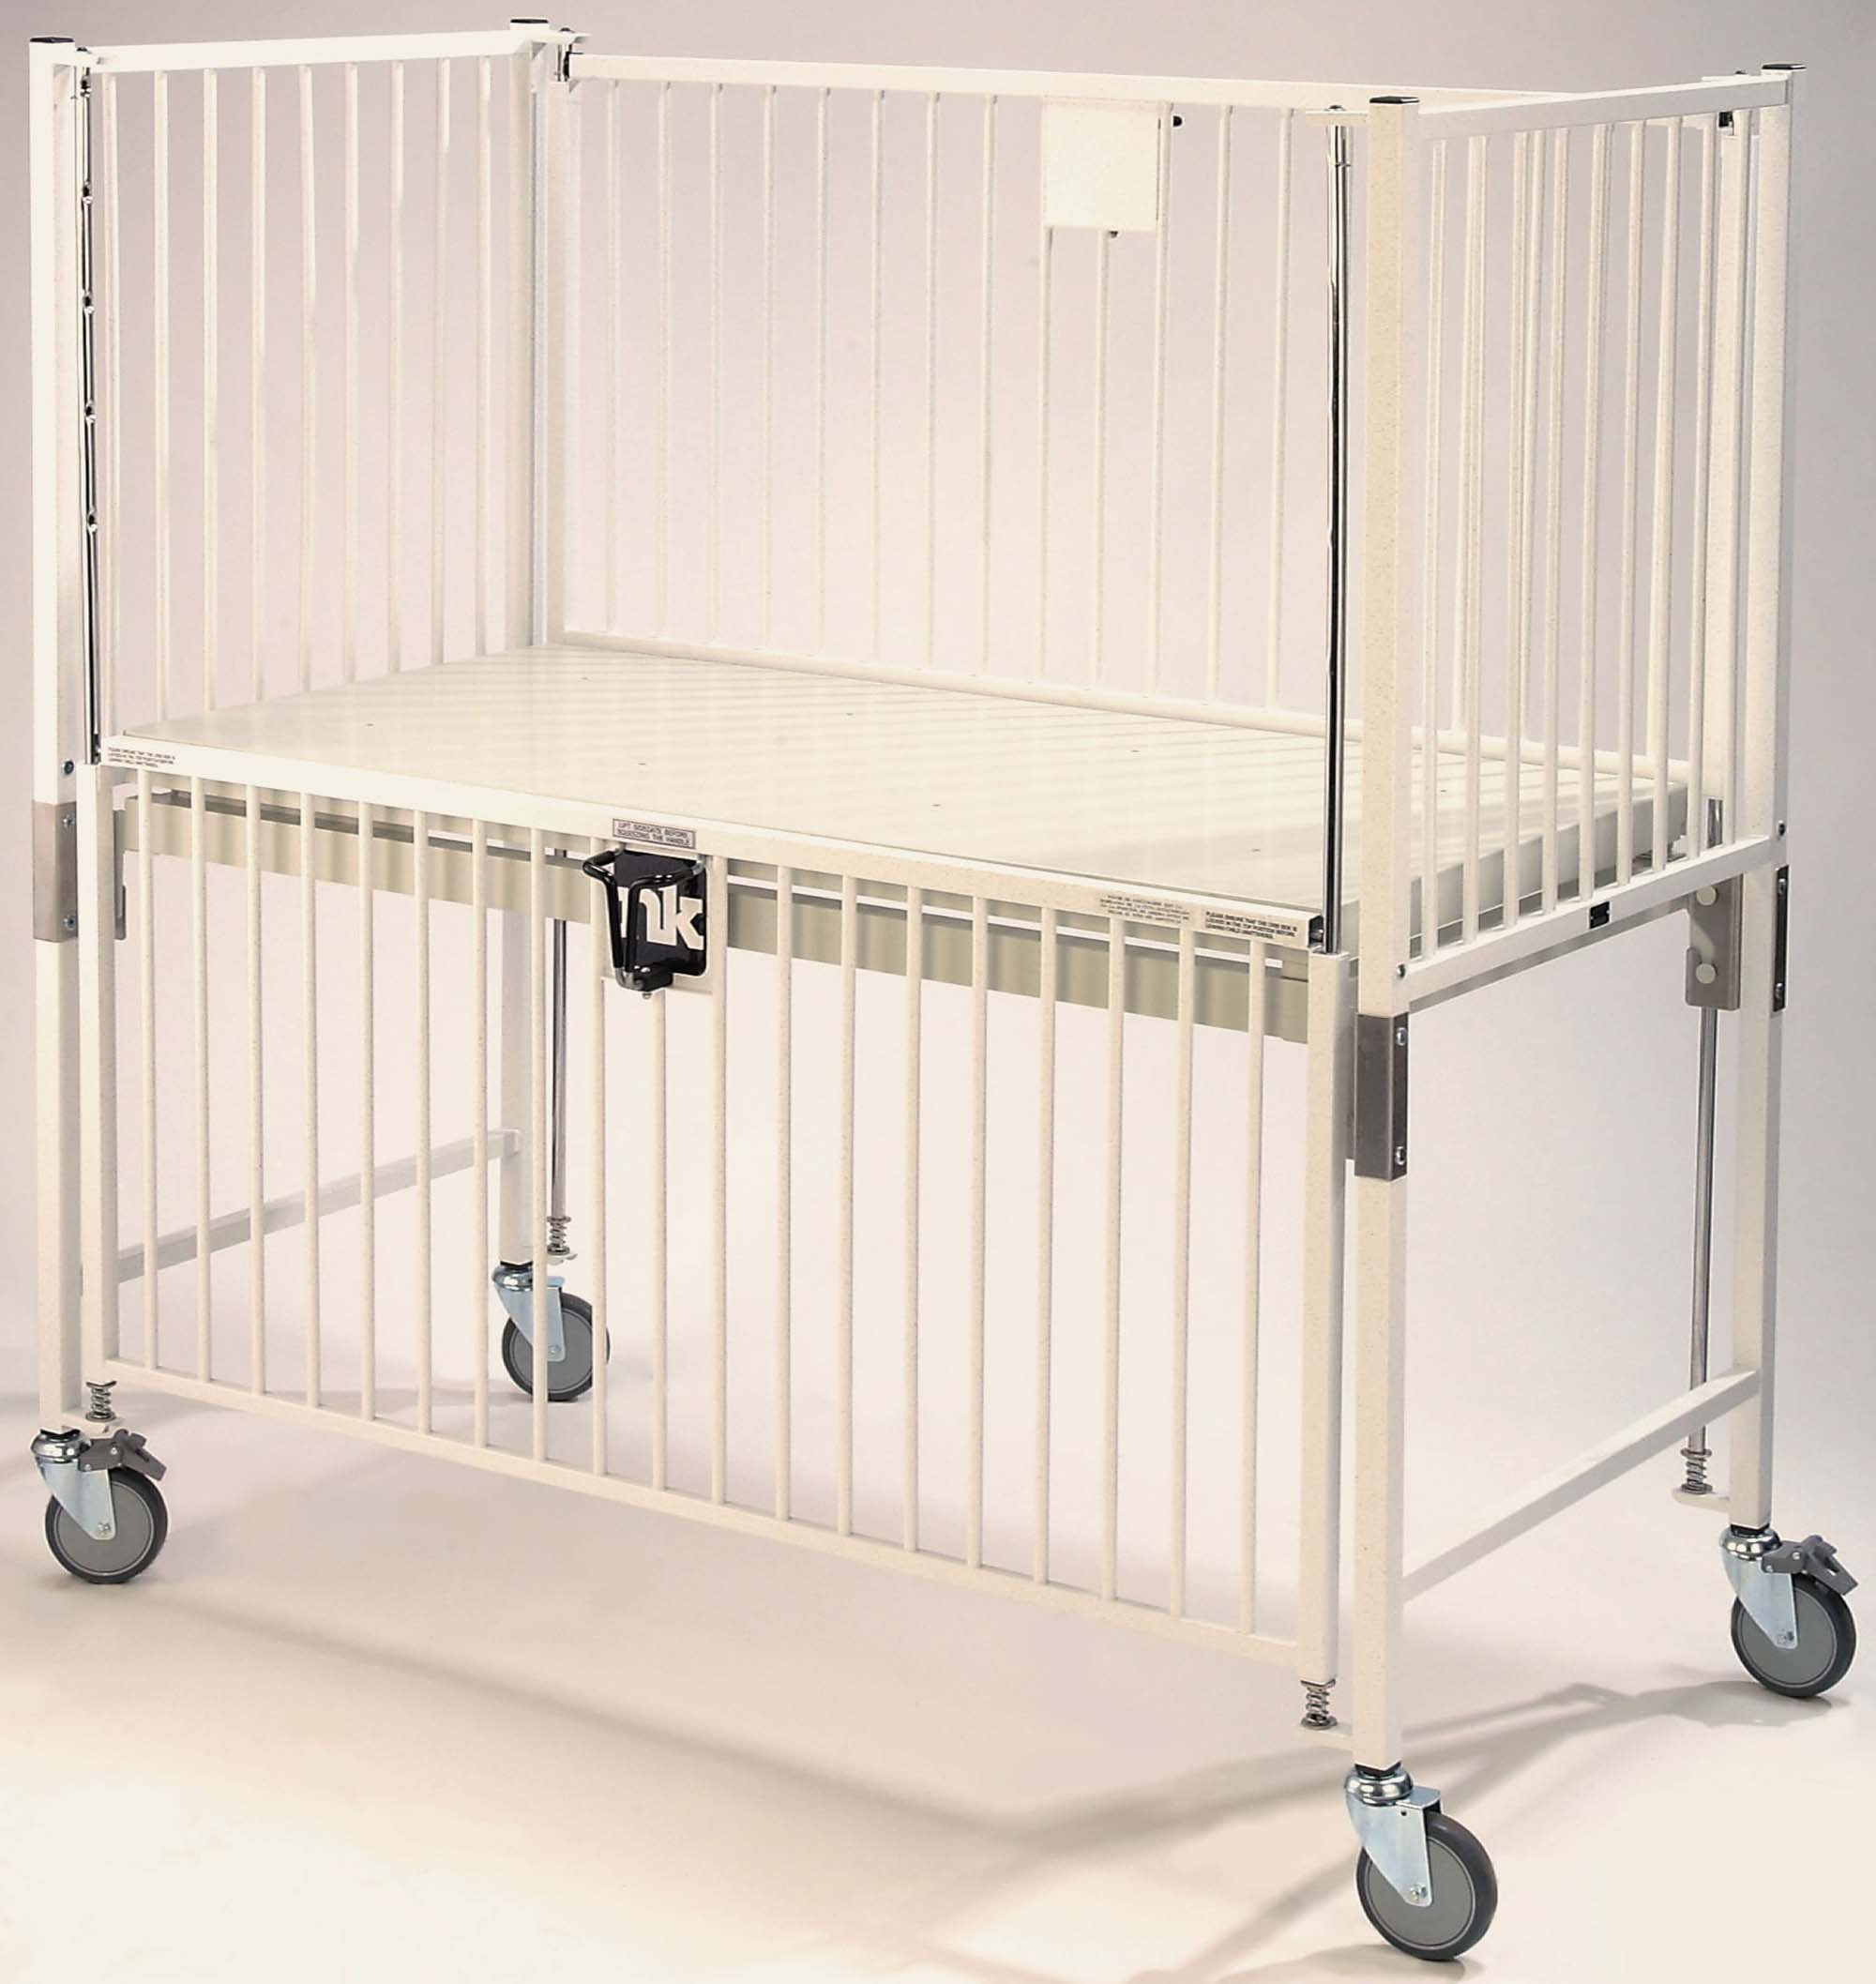 Pediatric hospital bassinet - HQ06-CH2F - Zhongshan Hanqi Medicalequiment  Technology - on casters / with IV pole / with side rails